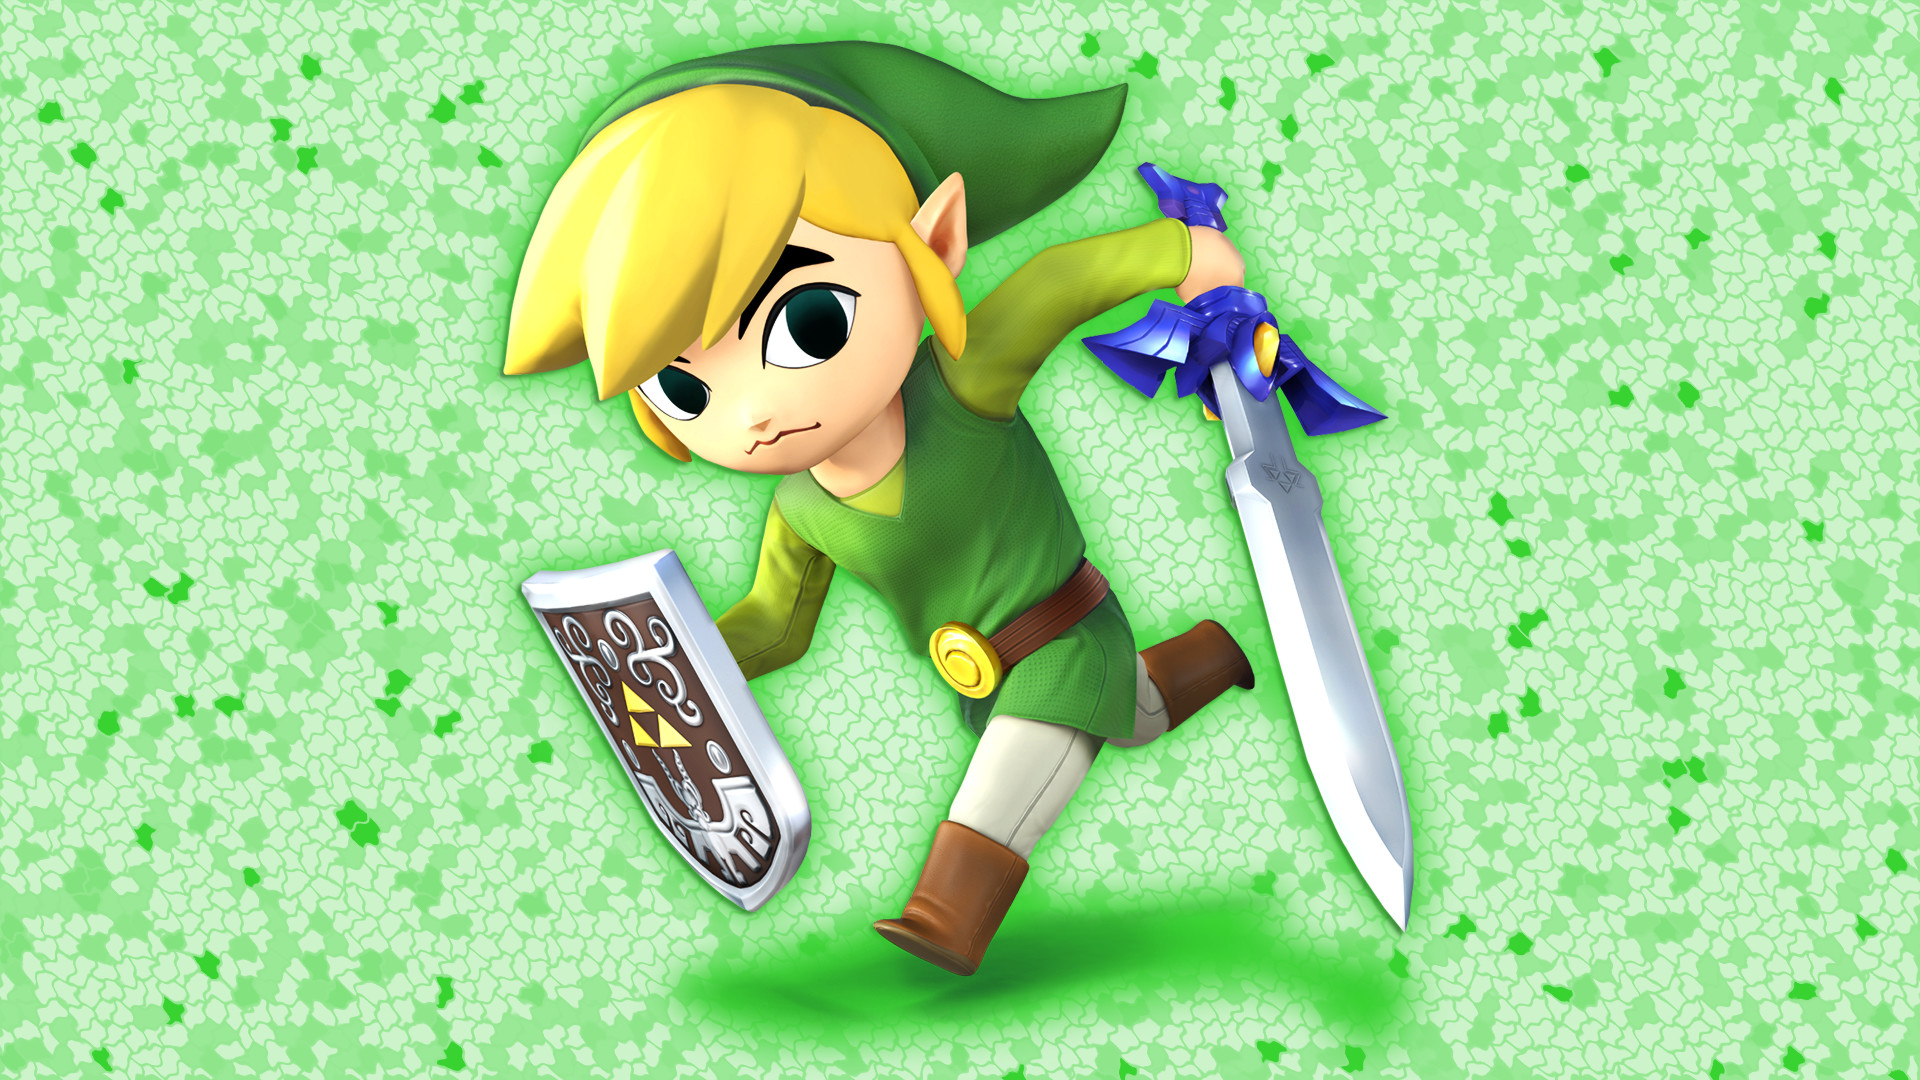 1920x1080 100% Quality HD-Toon Link | Cool Toon Link Backgrounds